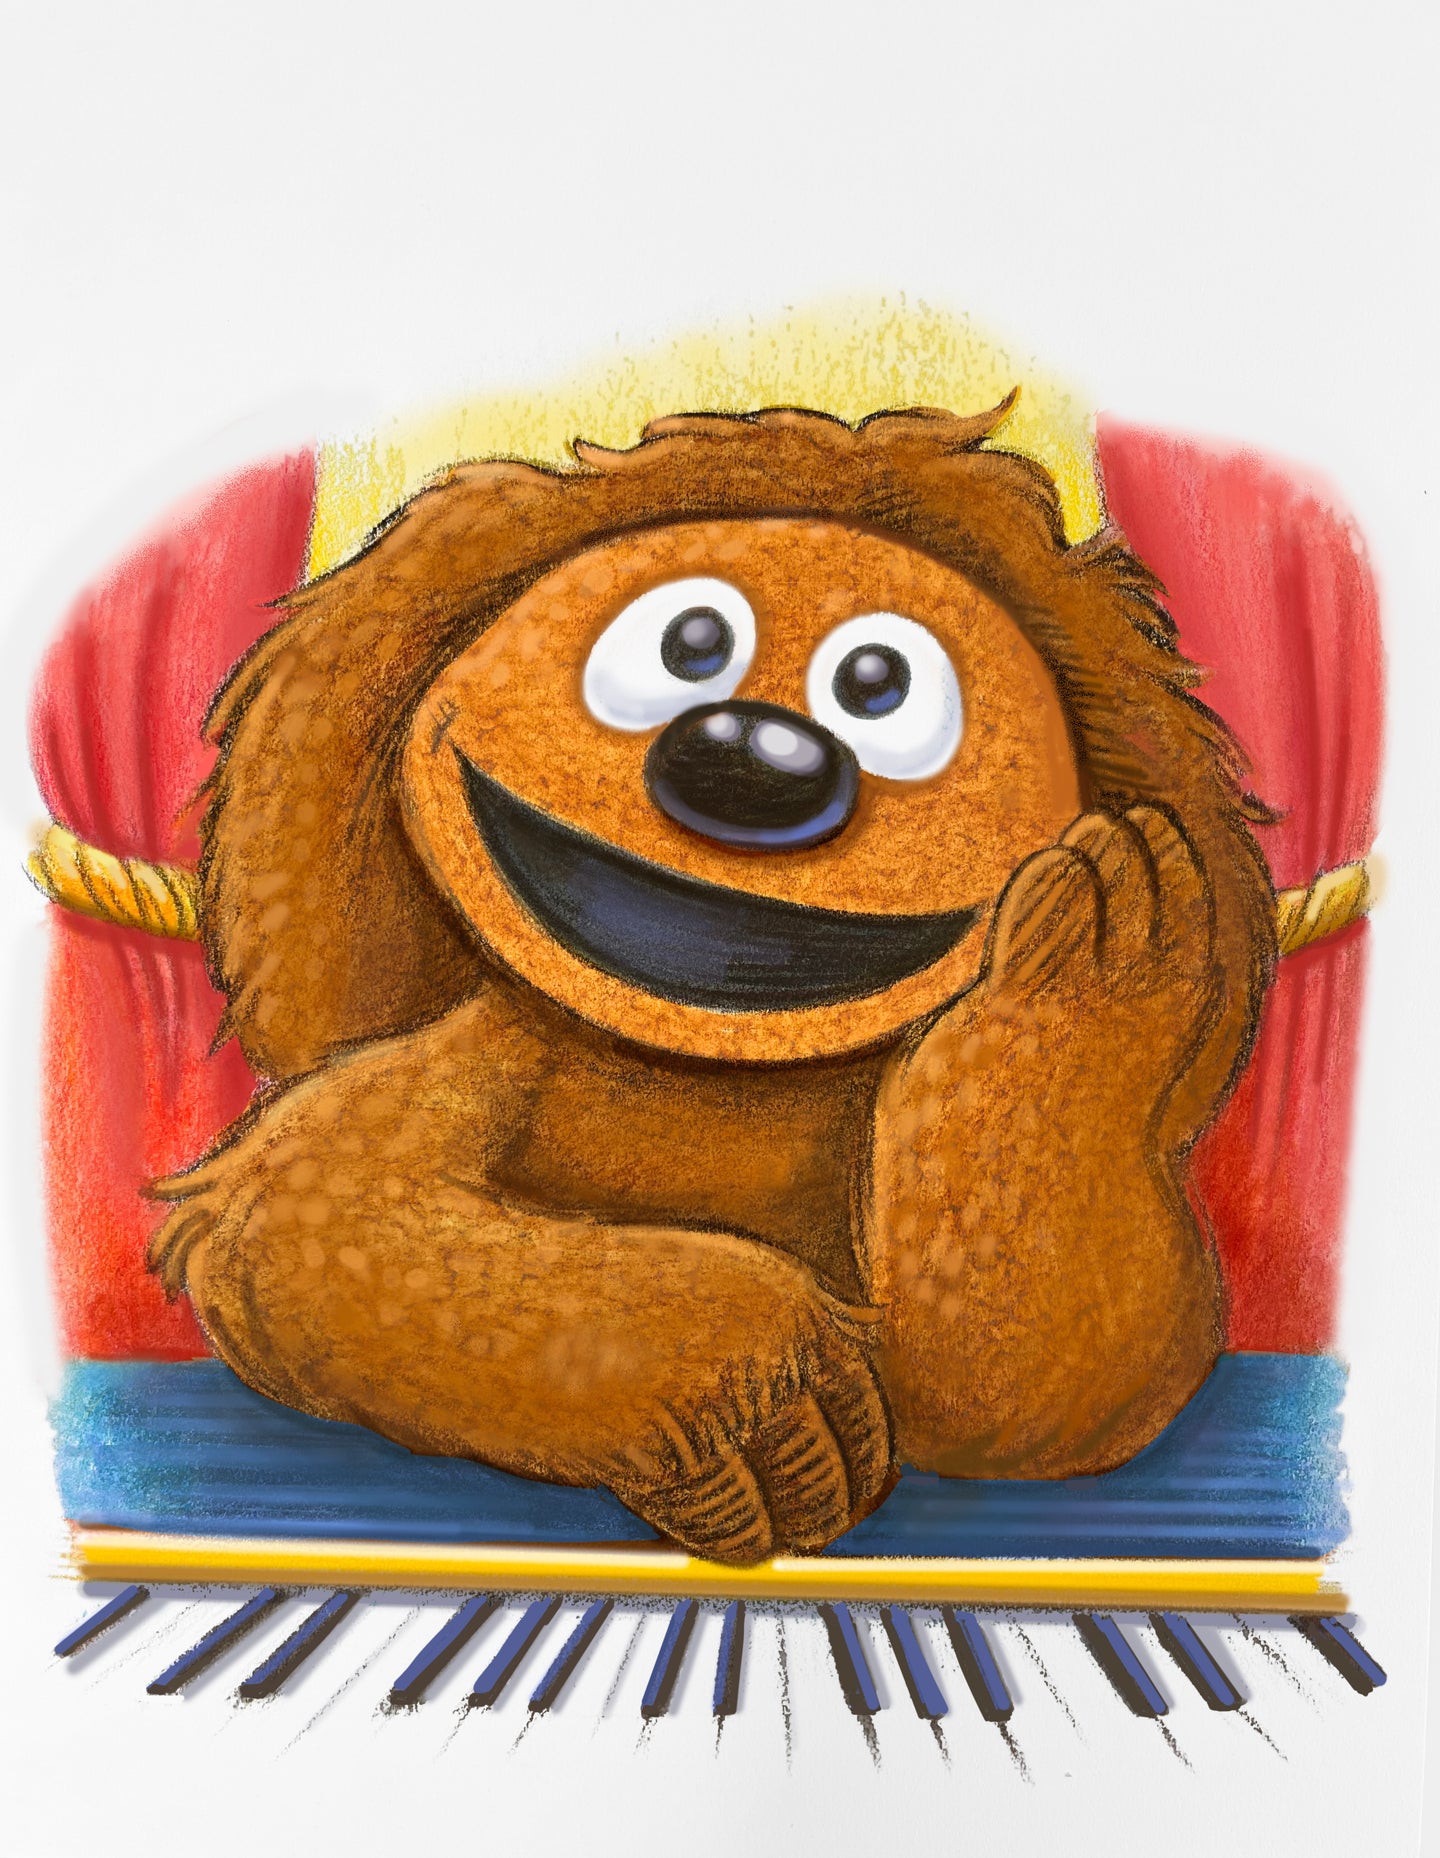 Muppets Rowlf the Dog Art Print - Created by Guy Gilchrist